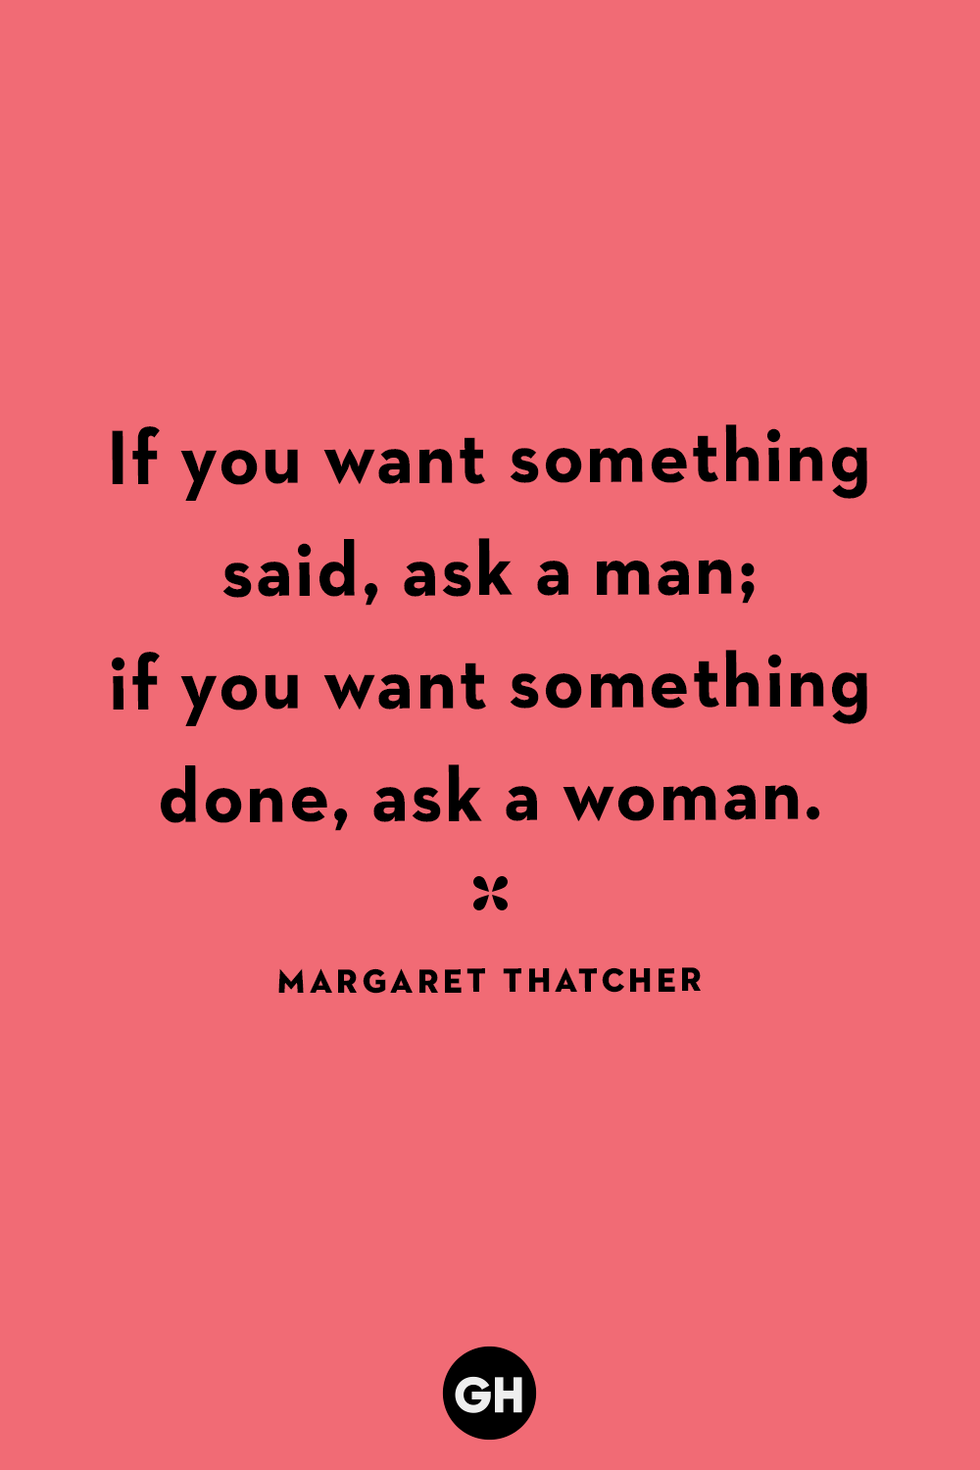 best powerful women quotes